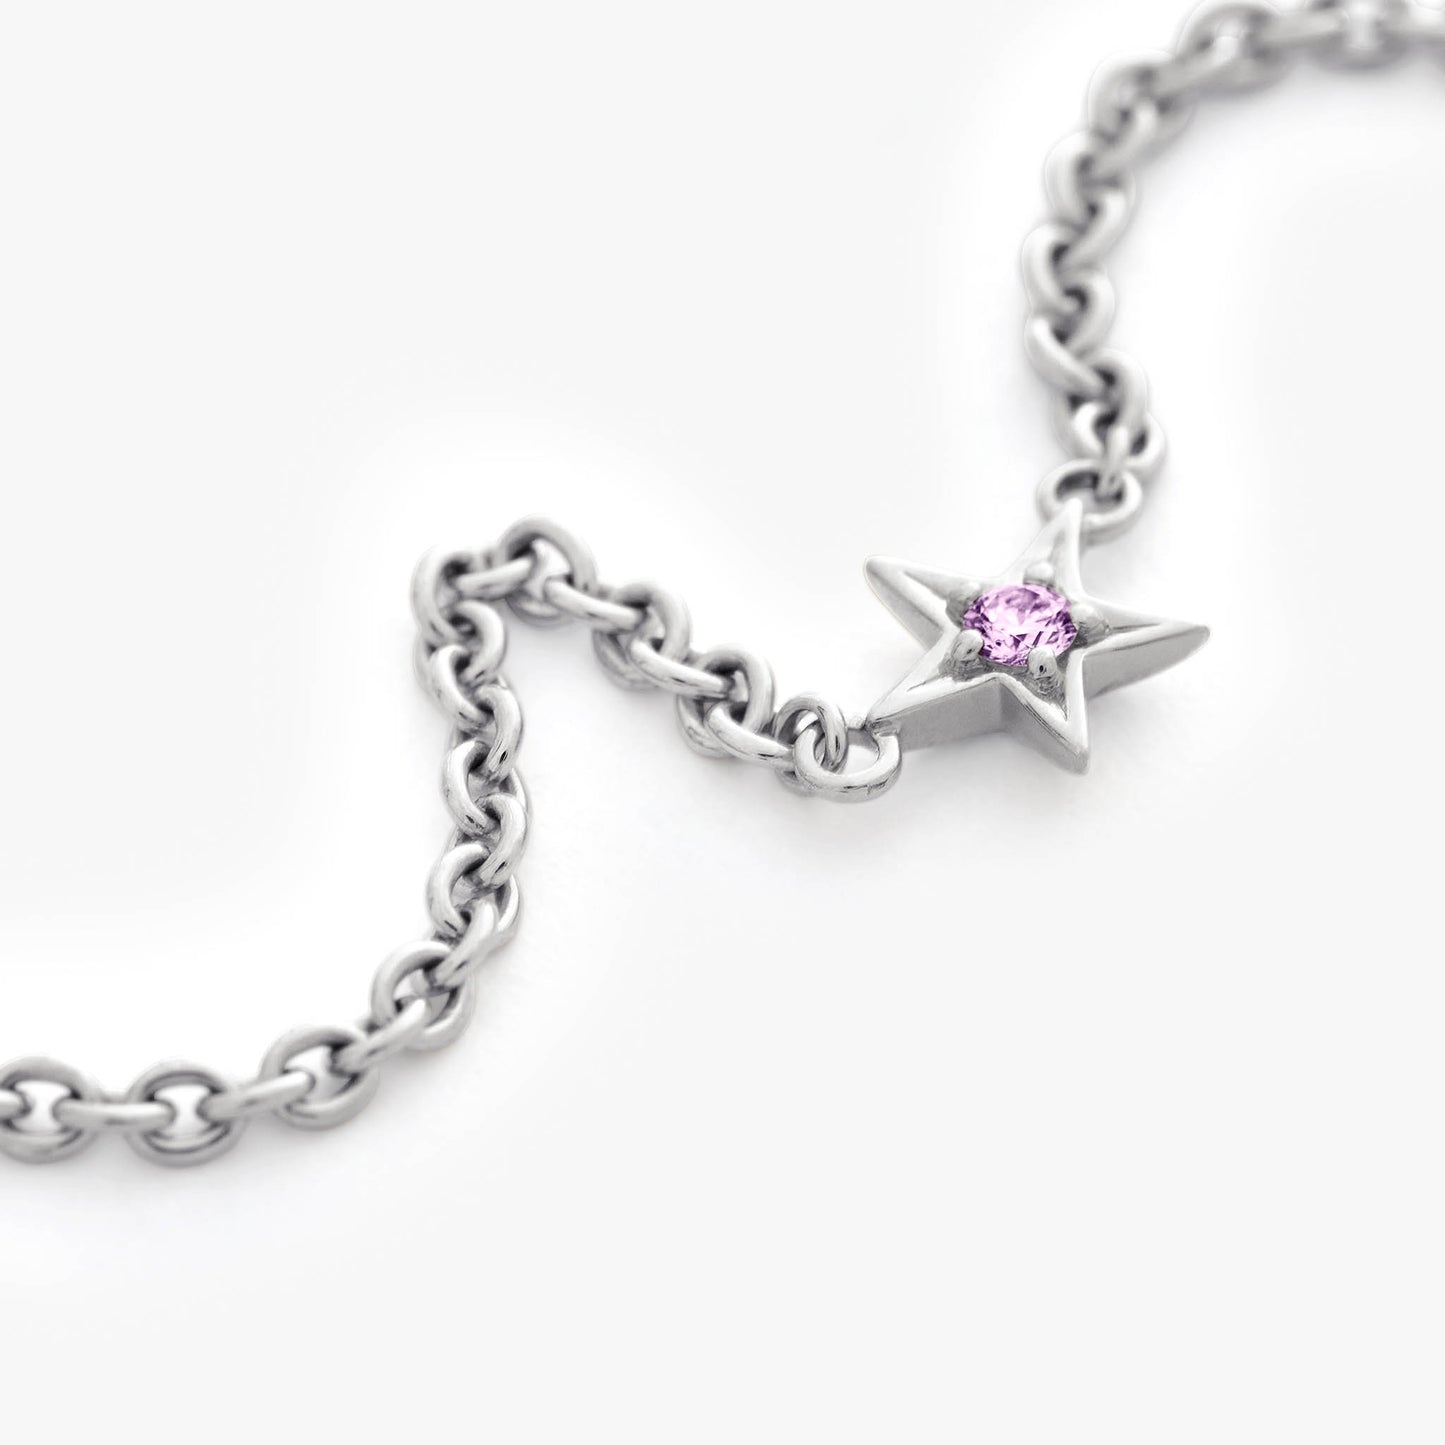 Guiding Star 18ct White Gold & Pink Sapphire Necklace, 105cm